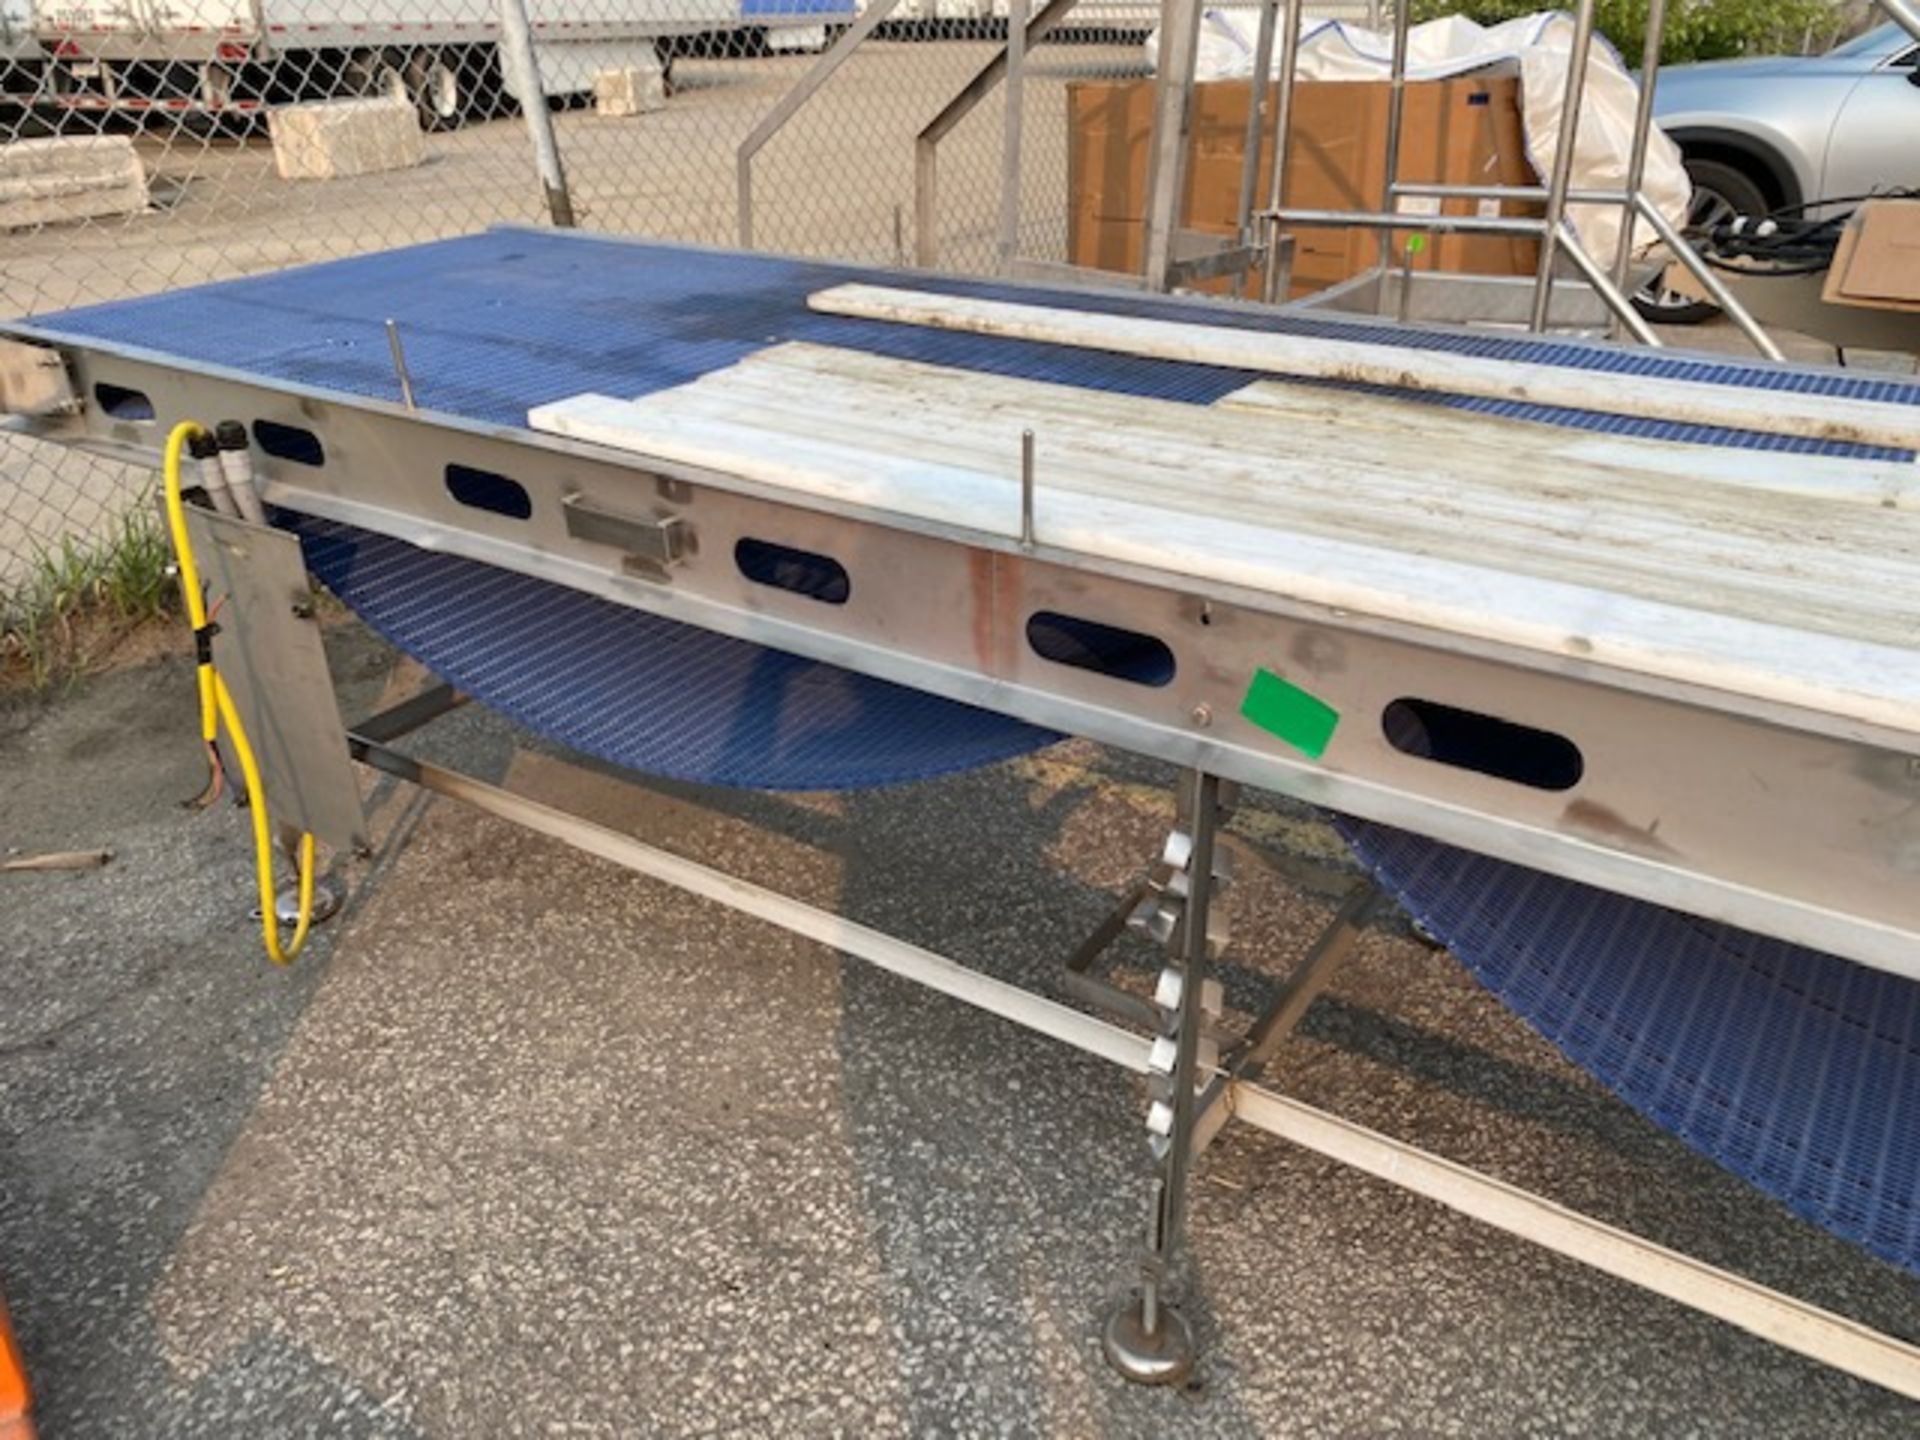 CONVEYOR LARGE(BLUE), (AS IS WHERE IS), (142"L X 40"W) - Image 2 of 4